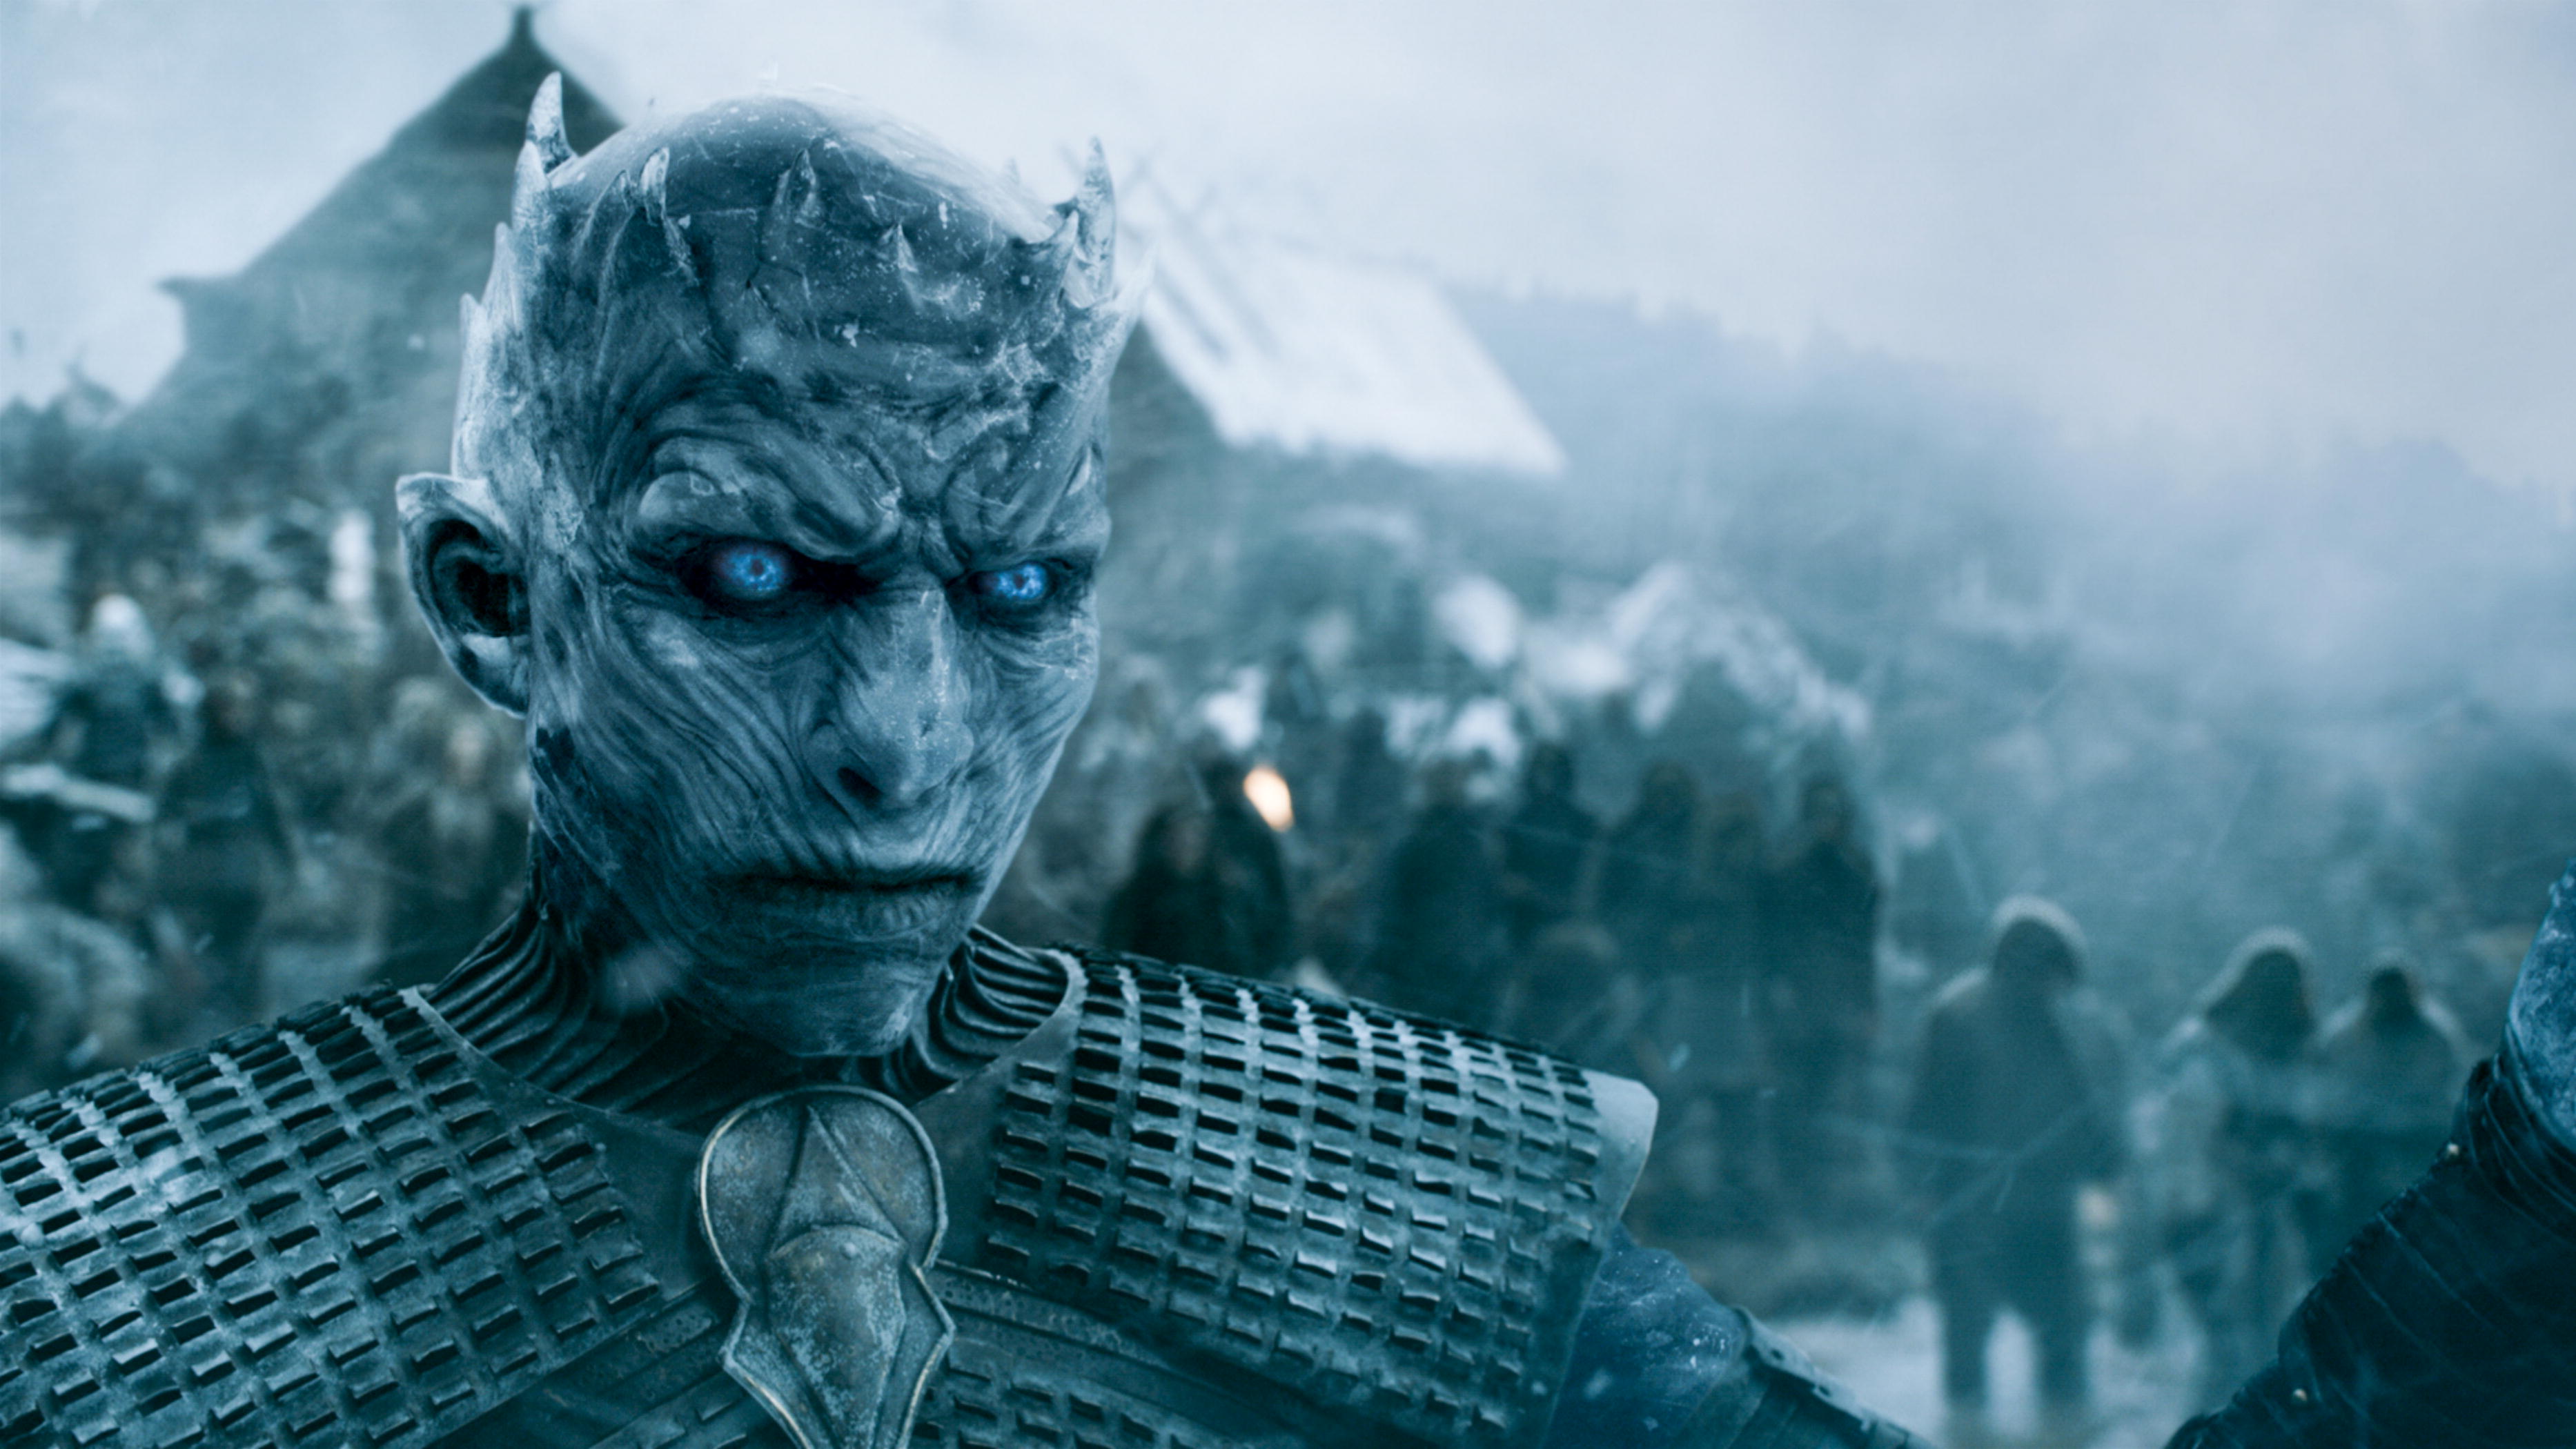 Game of Thrones : Où se dirige le Night King ? nouvelle théorie...